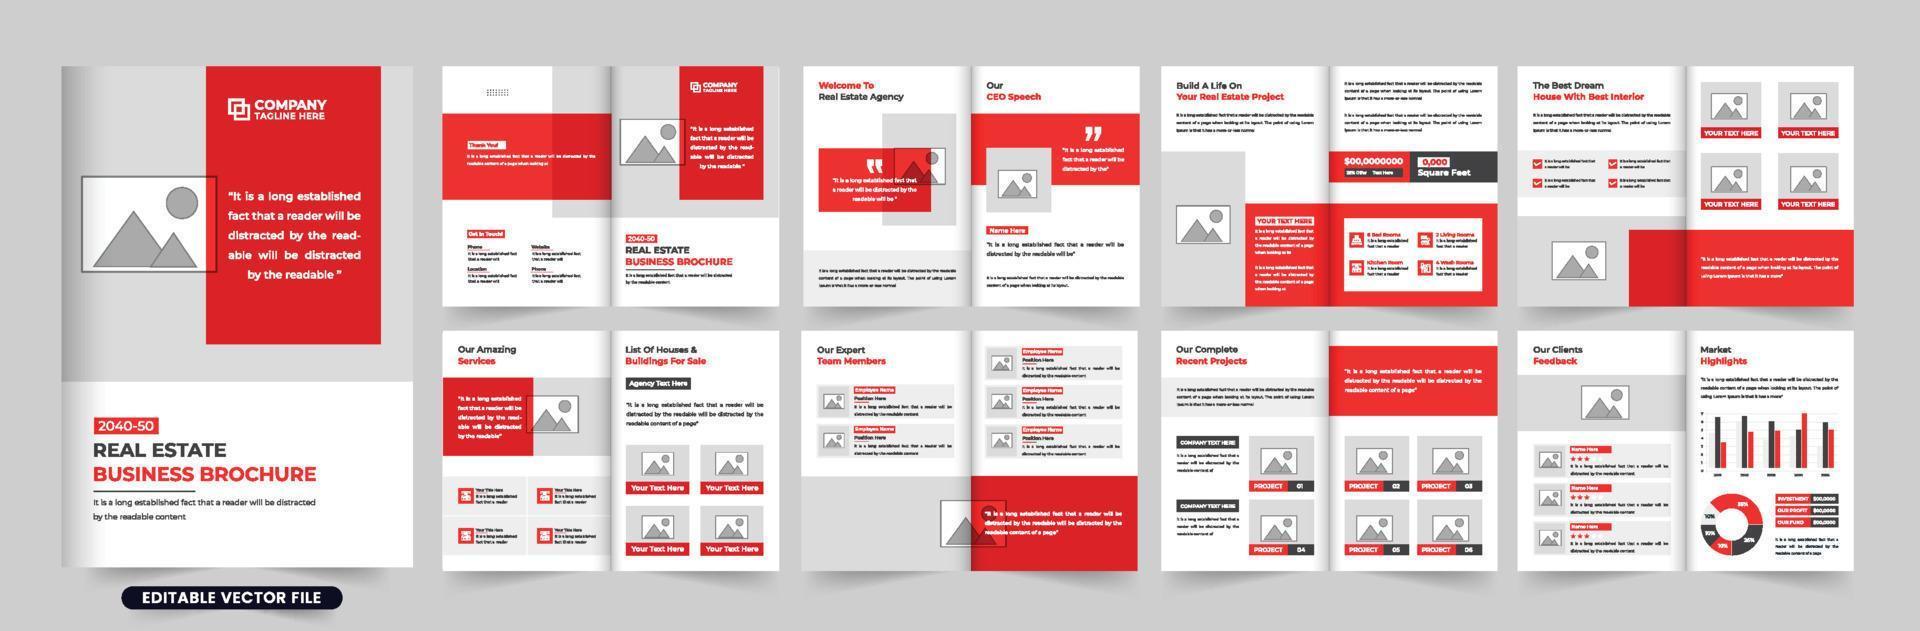 Creative home selling brochure template vector with red and dark colors. Real estate business magazine layout design with photo placeholders. House selling agency booklet design for marketing.